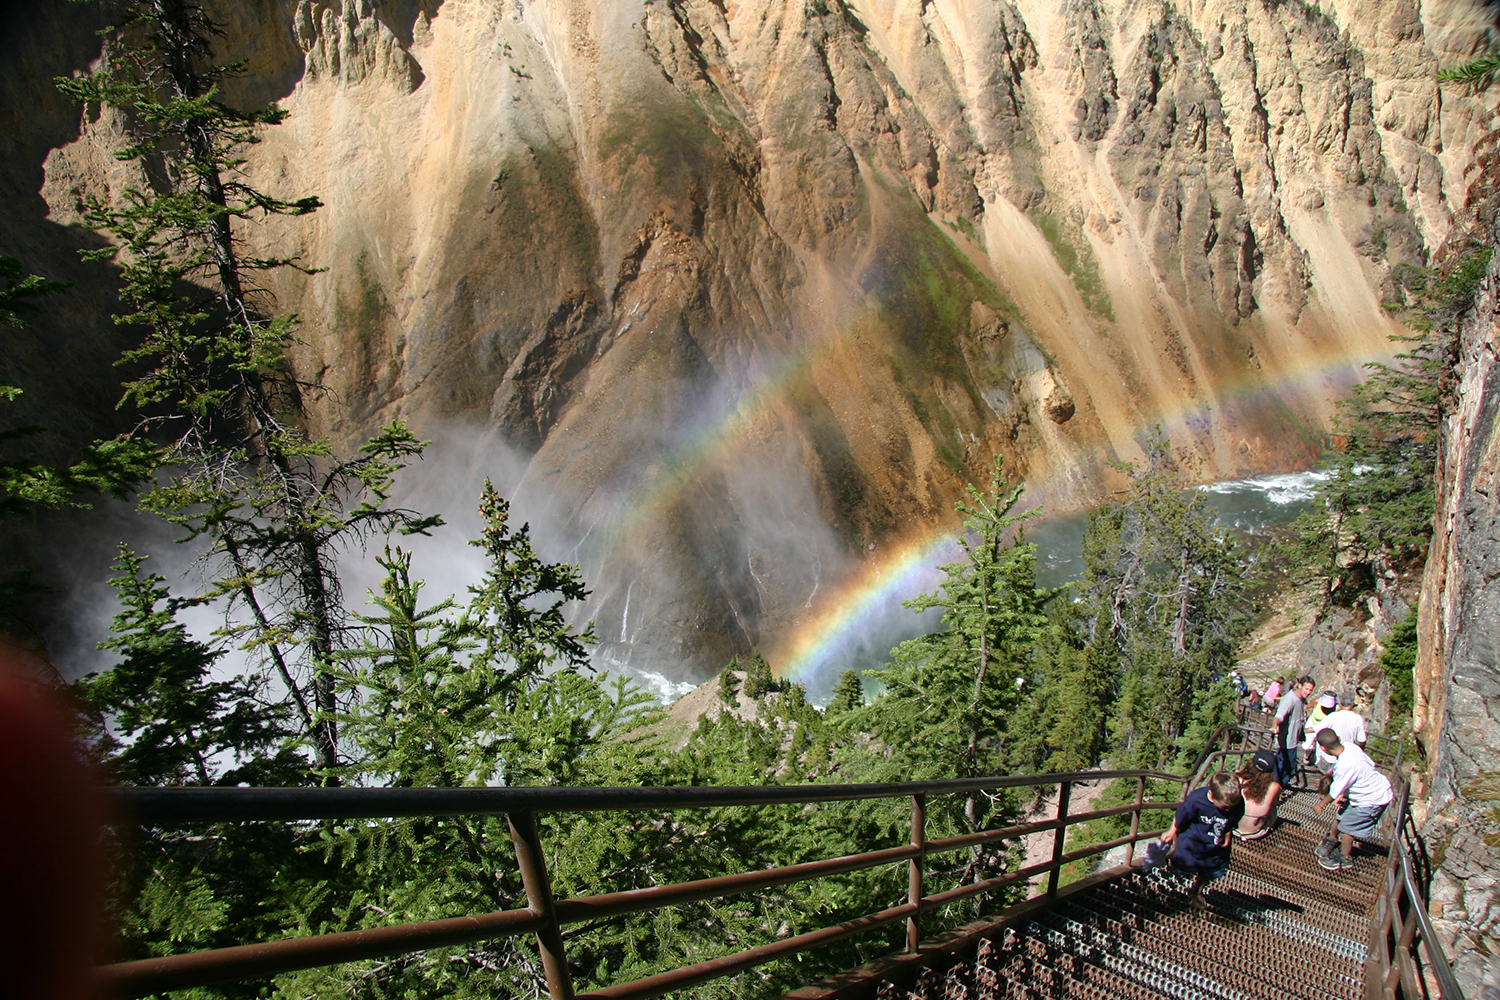 Rainbows bouncing off the spray at Yellowstone National Park's Grand Canyon. Image courtesy of Wyoming Office of Tourism